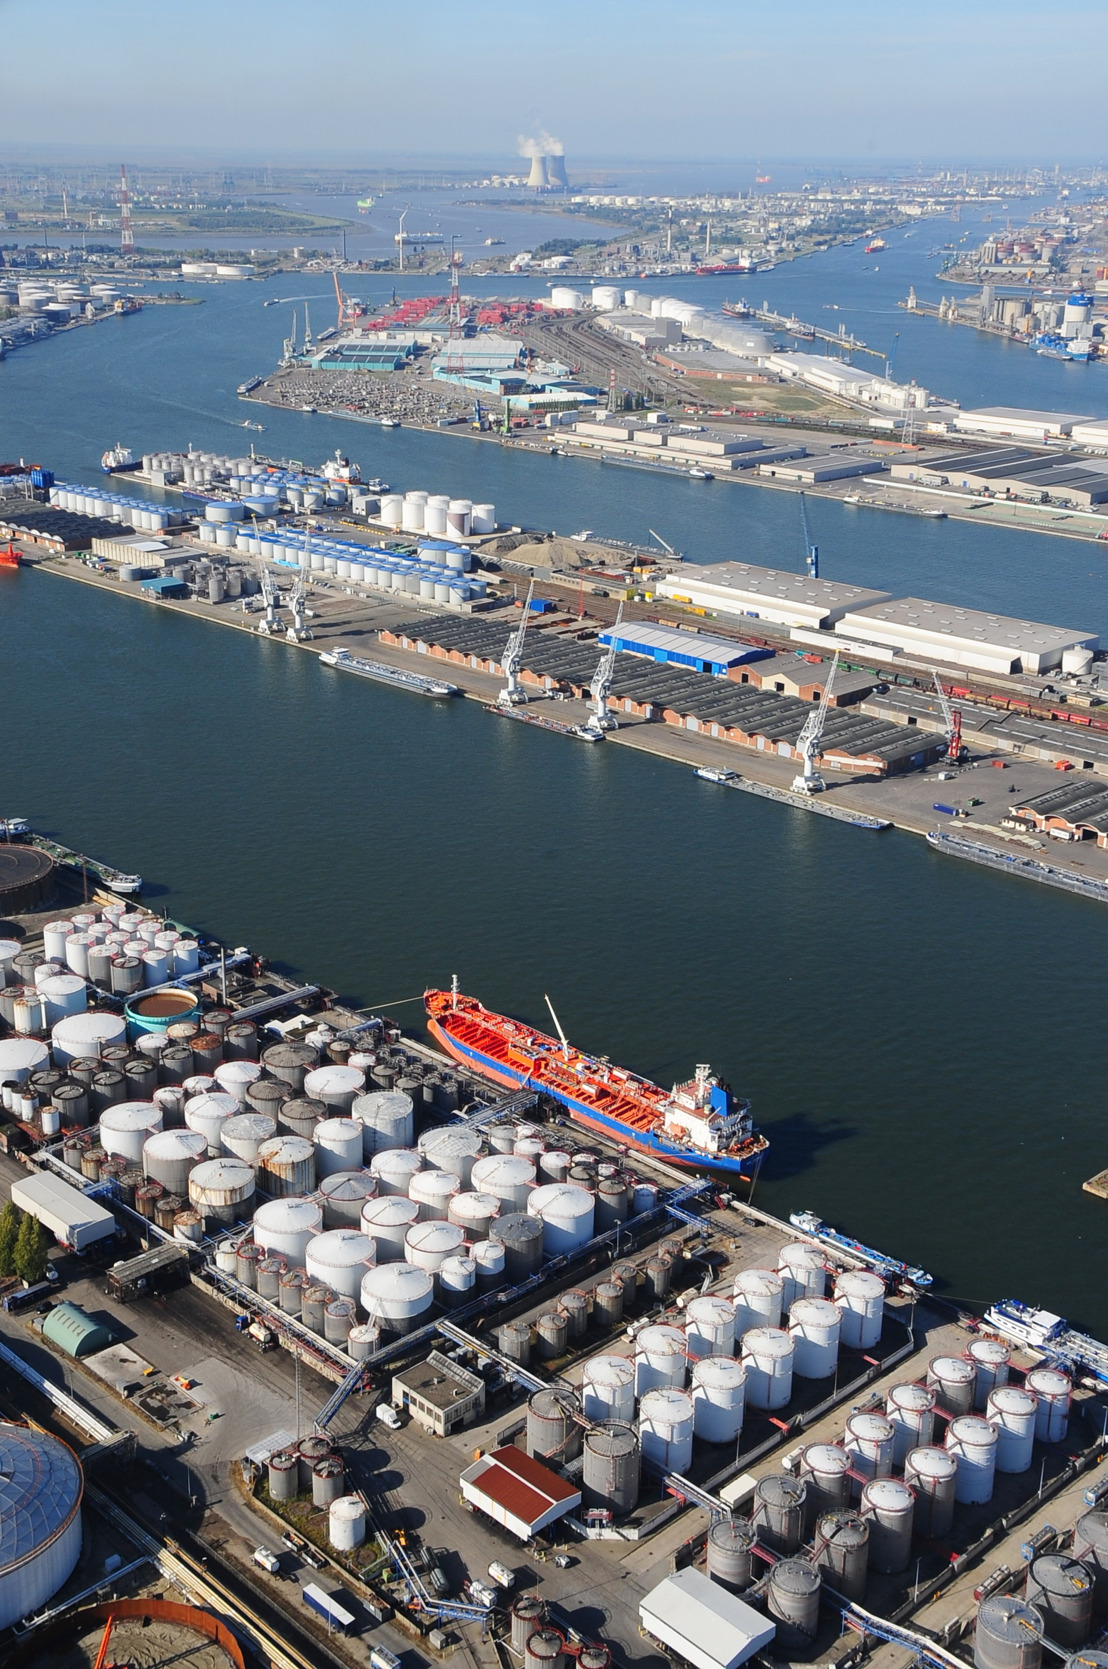 Port of Antwerp aims to further reduce CO2 emissions